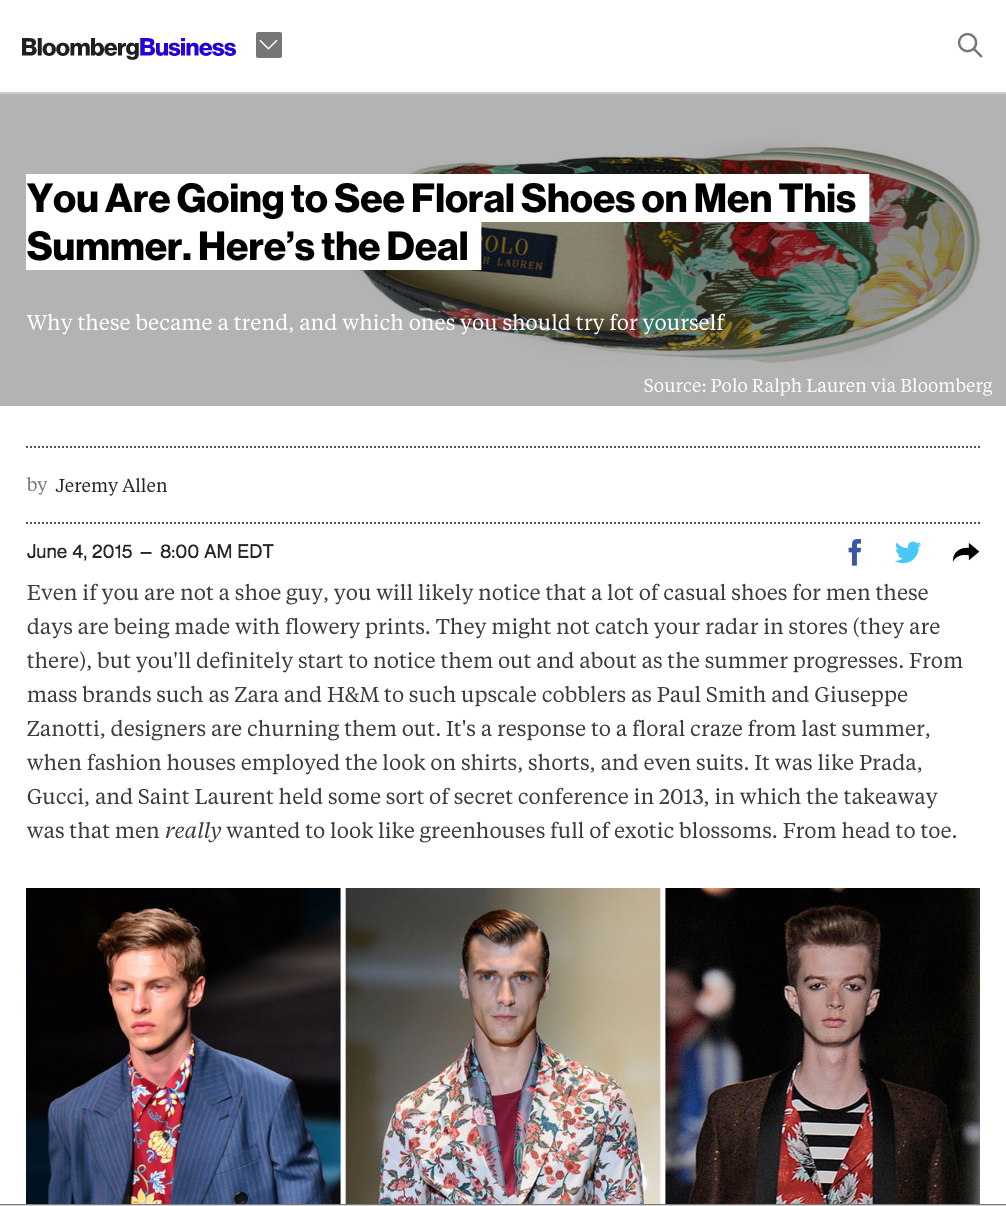  You Are Going to See Floral Shoes on Men This Summer. Here’s the Deal  June 2015   BLOOMBERG.COM  